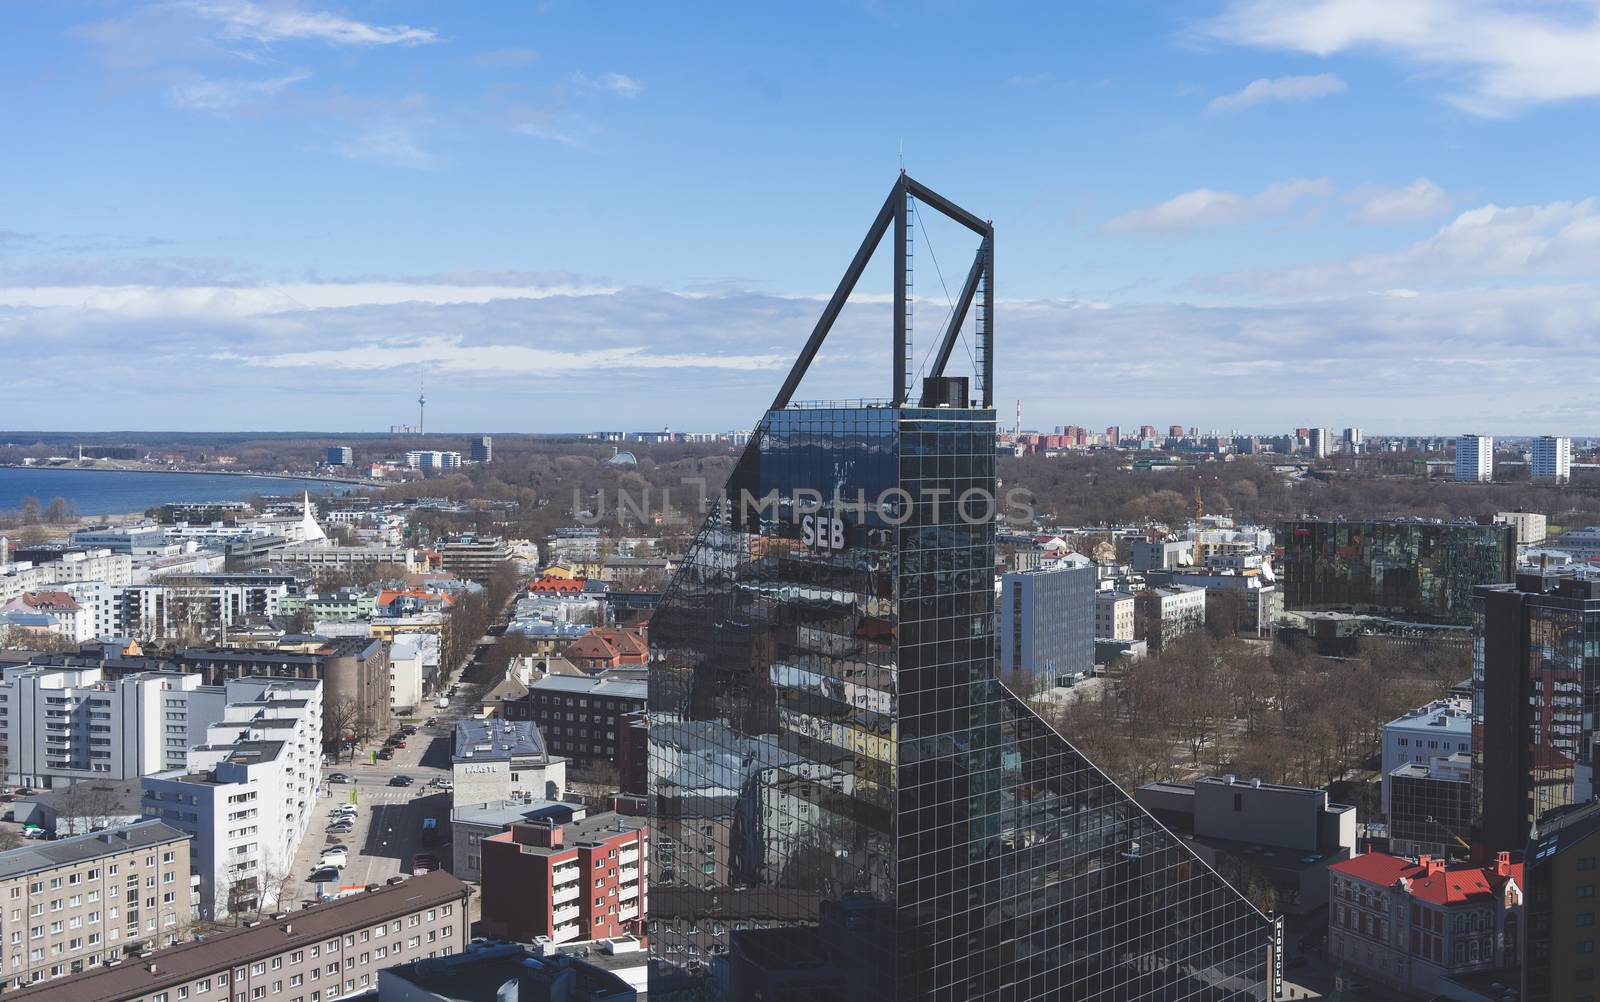 April 21, 2018 Tallinn, Estonia. View from the observation deck on the modern quarters and buildings of Tallinn.